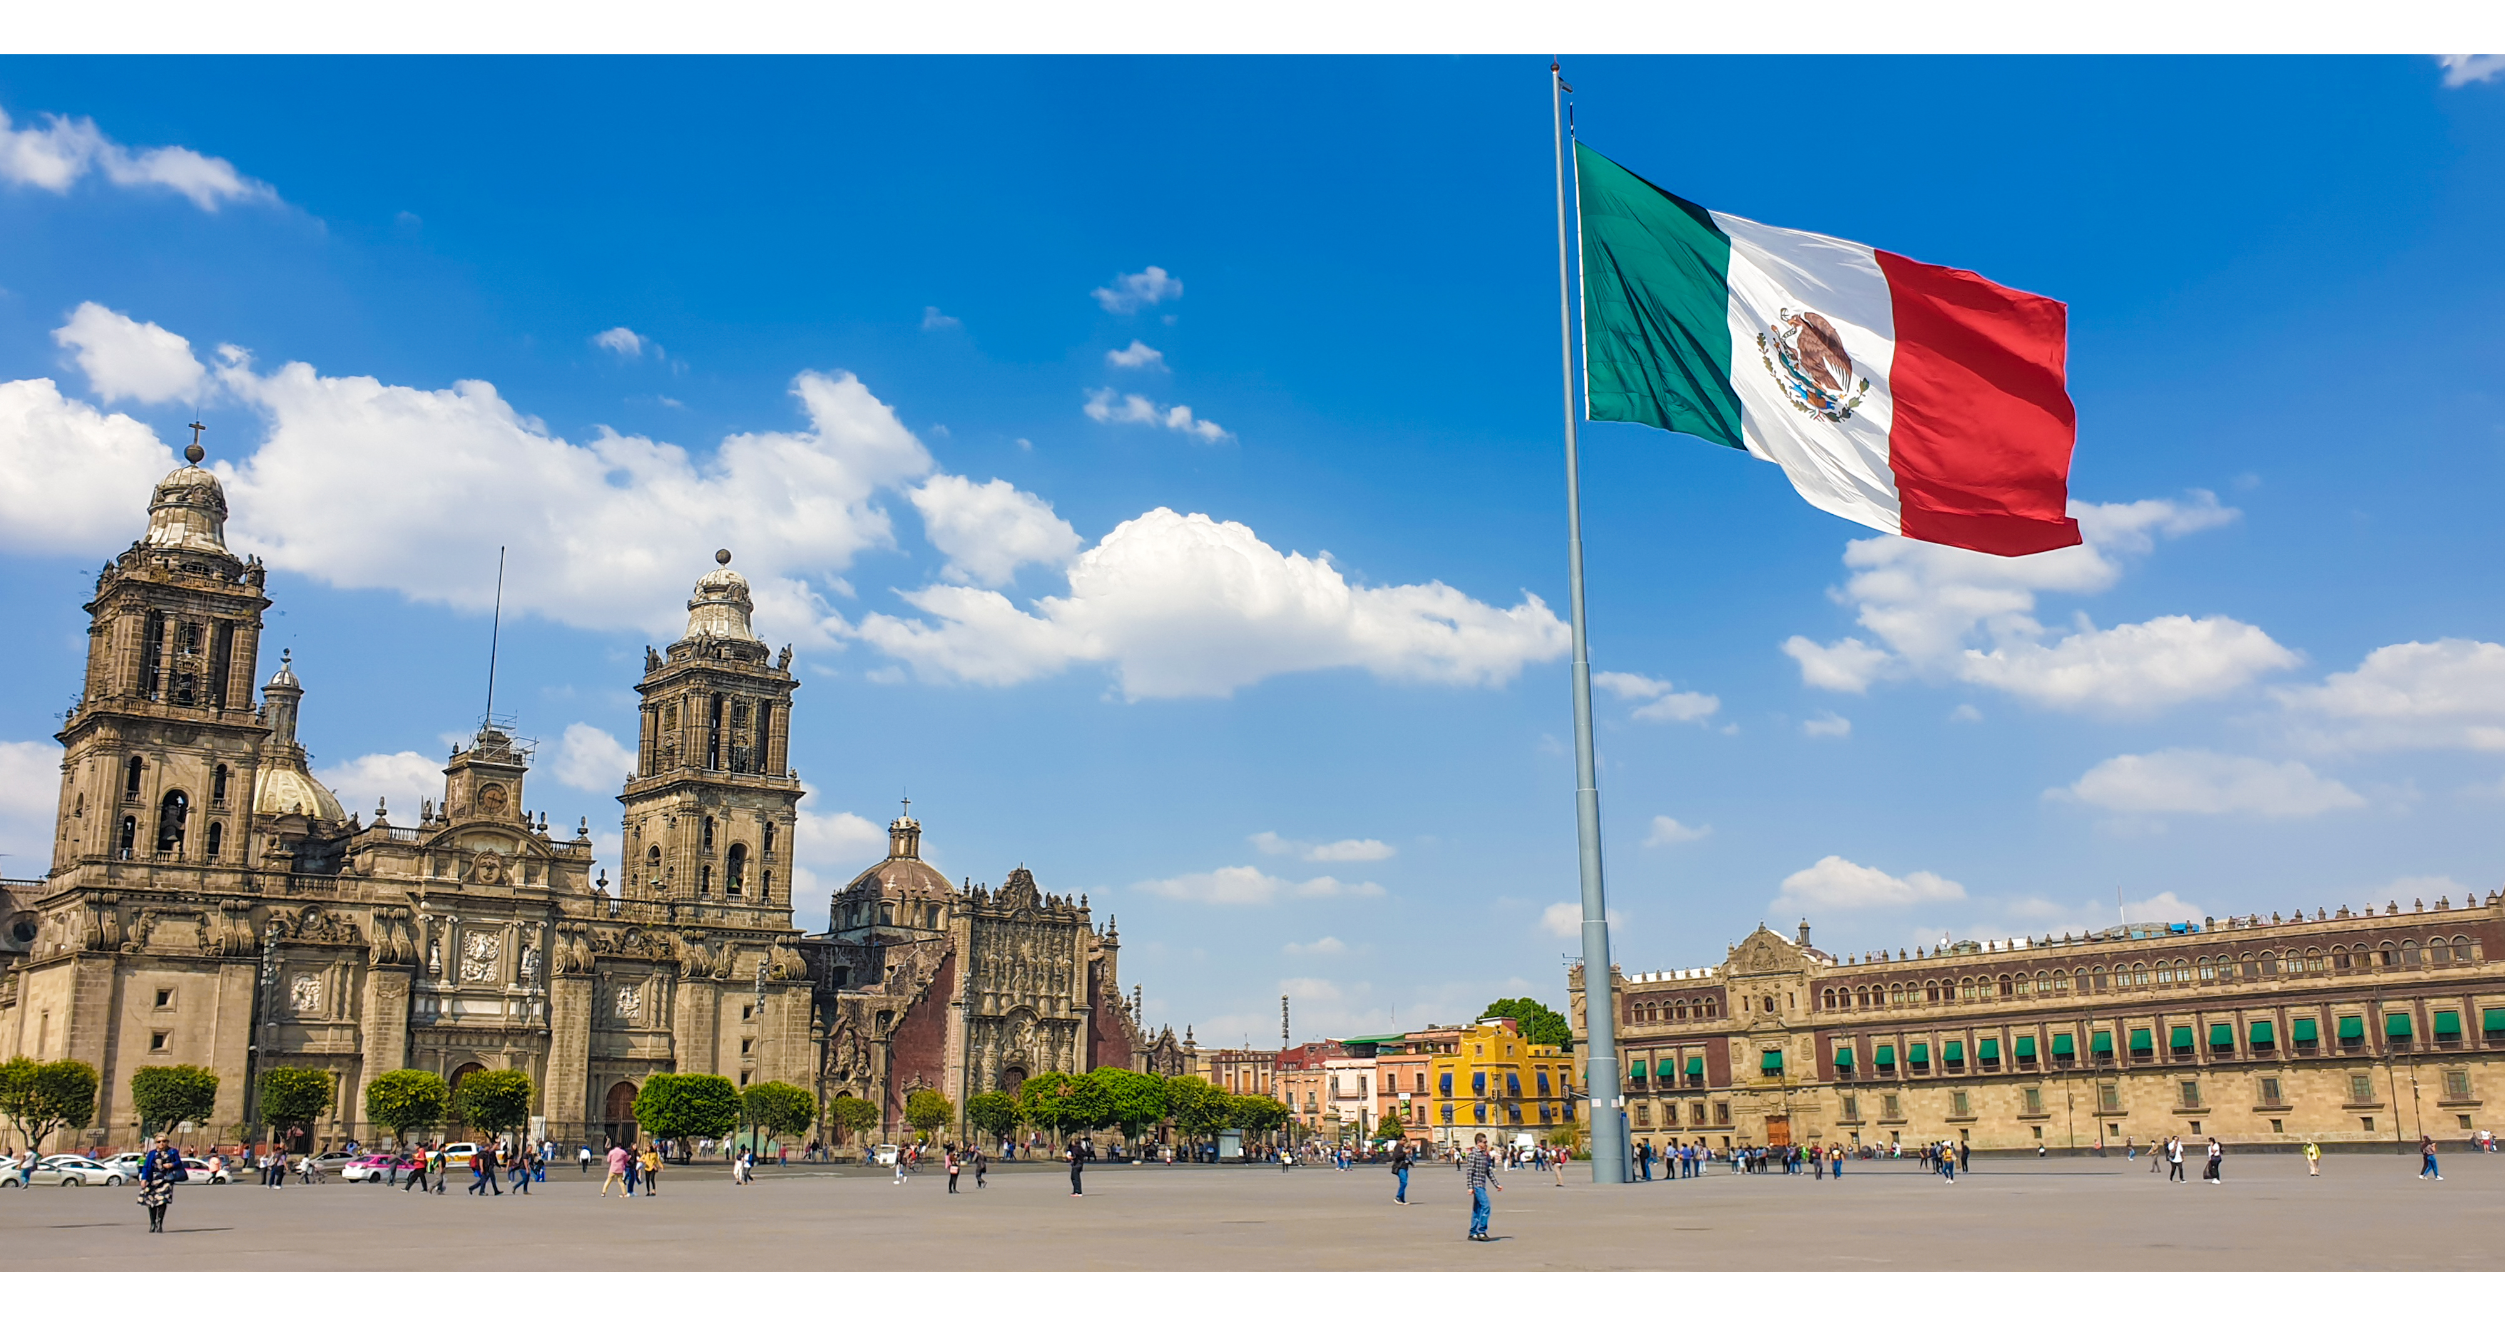 Mexico City's Zocalo with a Mexican flag in front of Mexico City Metropolitan Cathedral